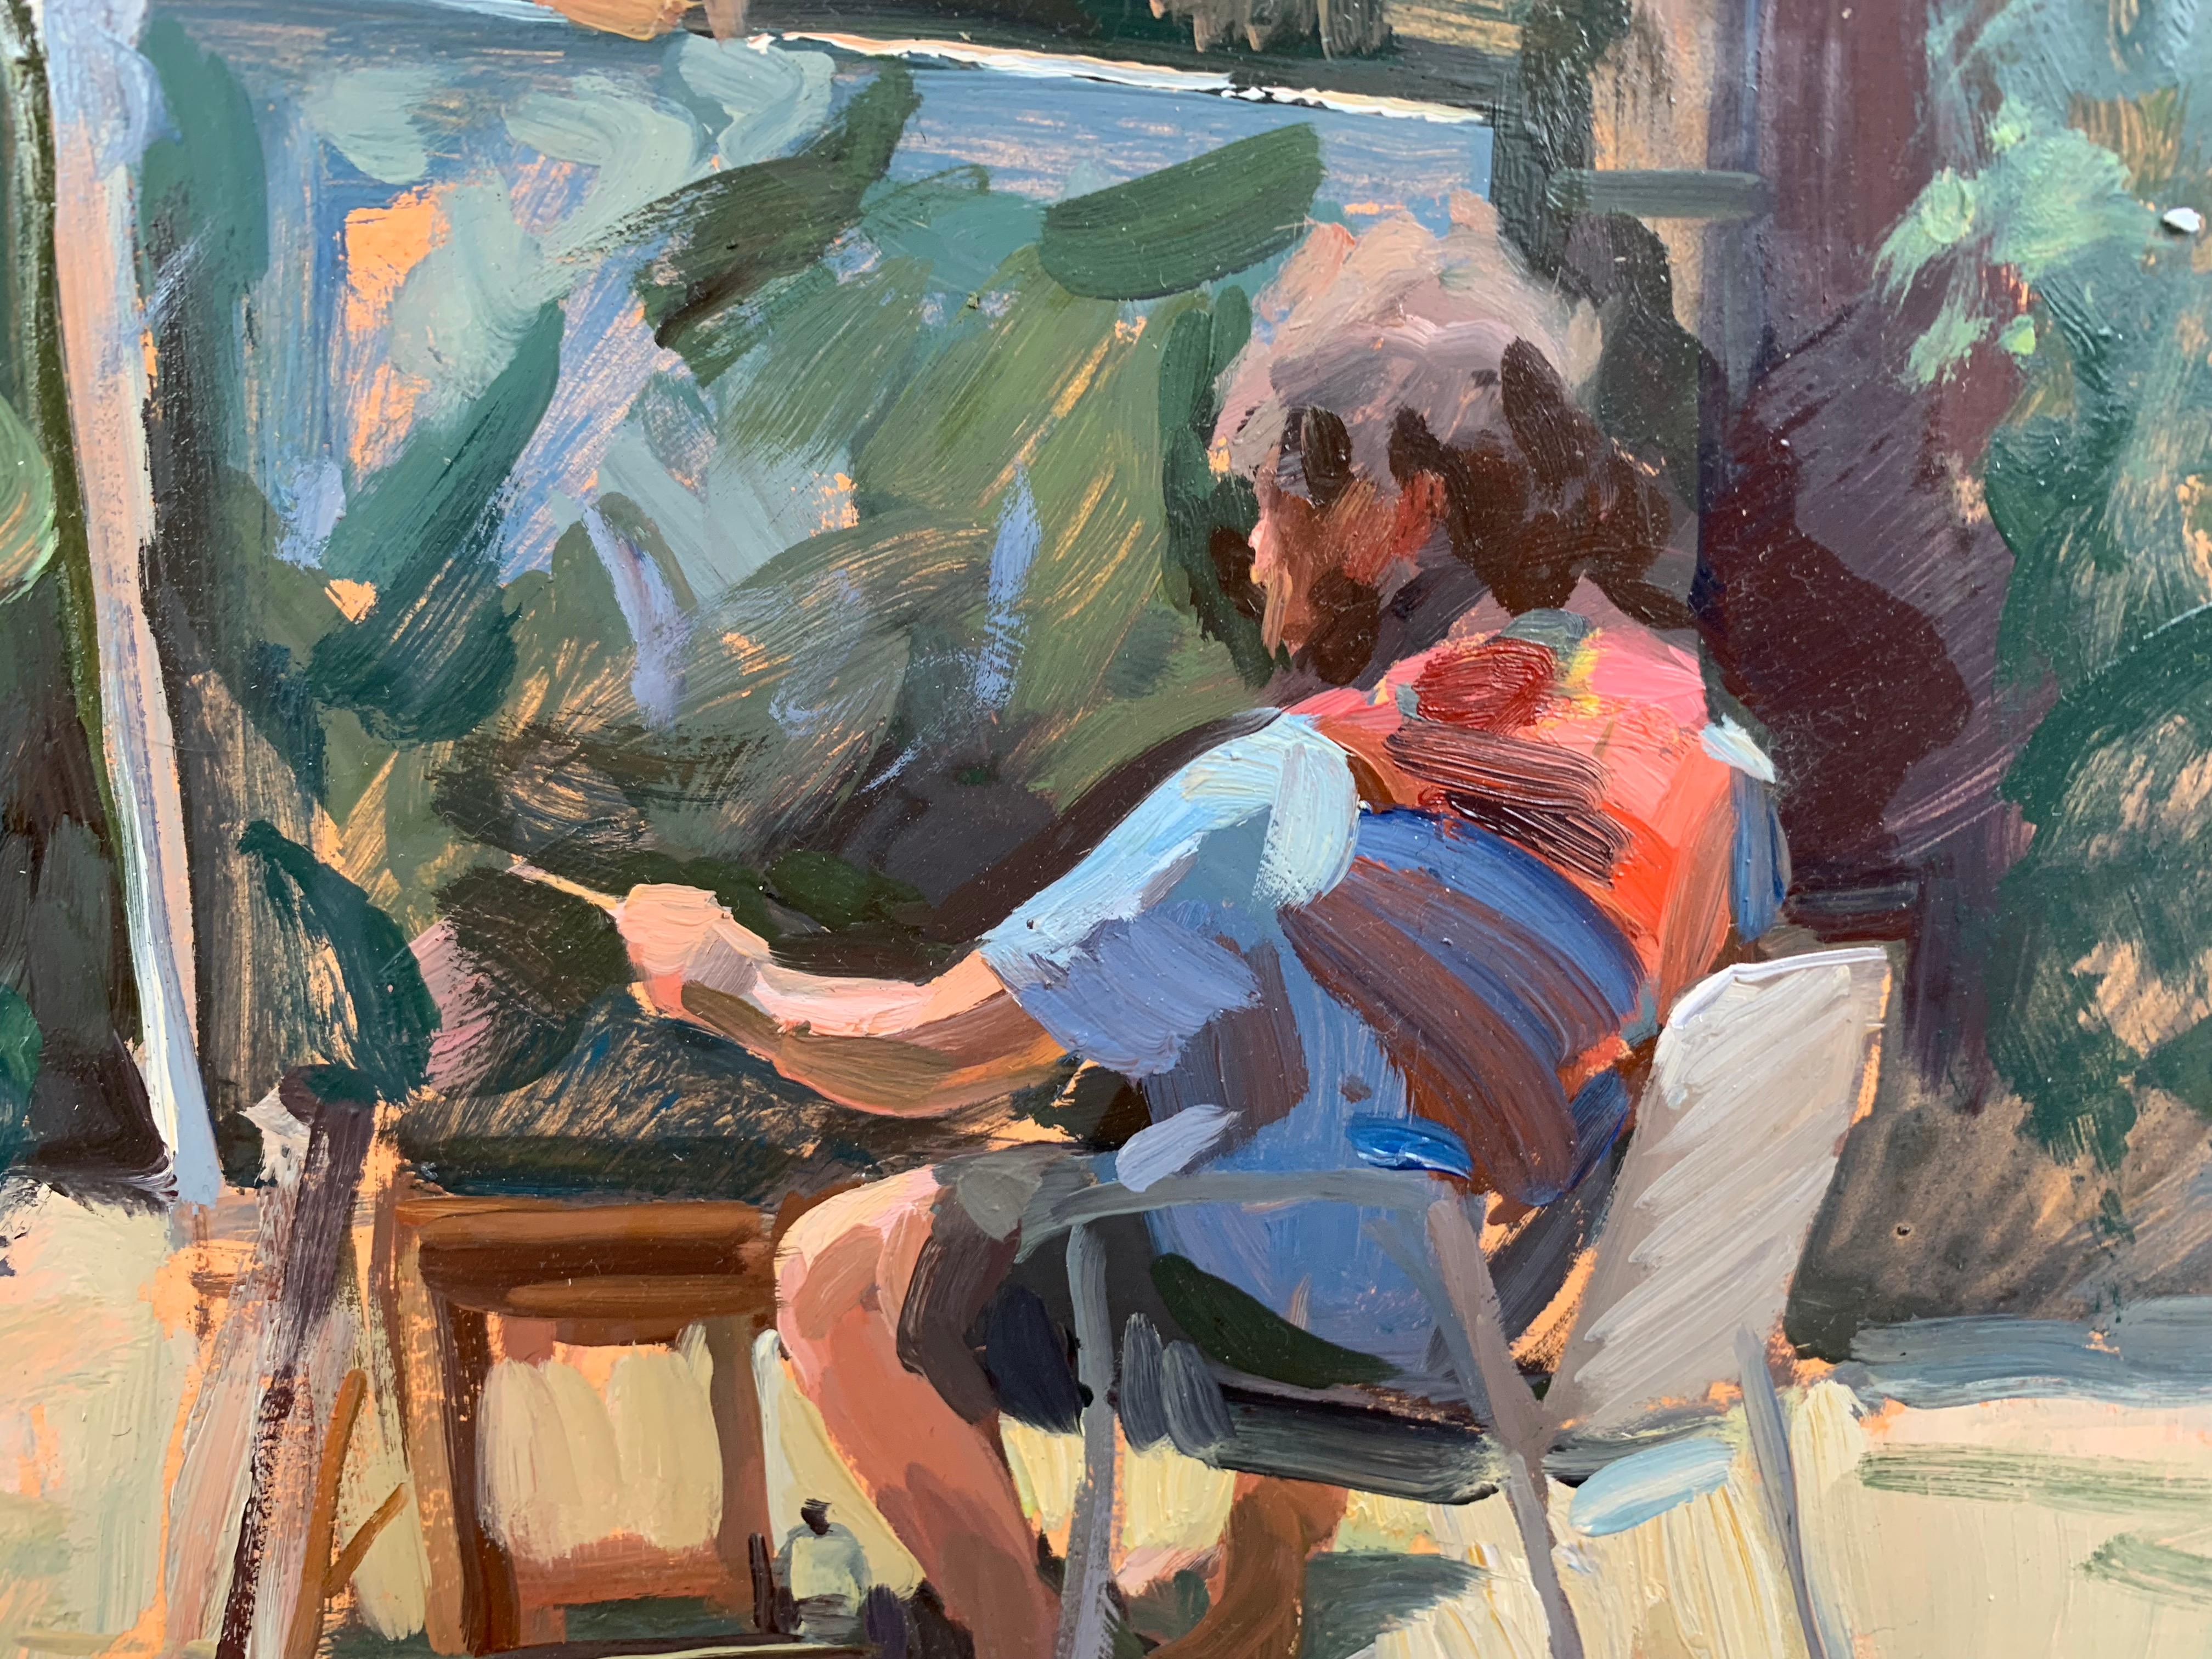 Painted en plein air, in Italy, Dalessio captures fellow artist, Ben Fenske, painting outdoors. 

Marc Dalessio was born in 1972 in Los Angeles, California. Even in his earliest years, it was evident that his passion was art. In 1989 he started at